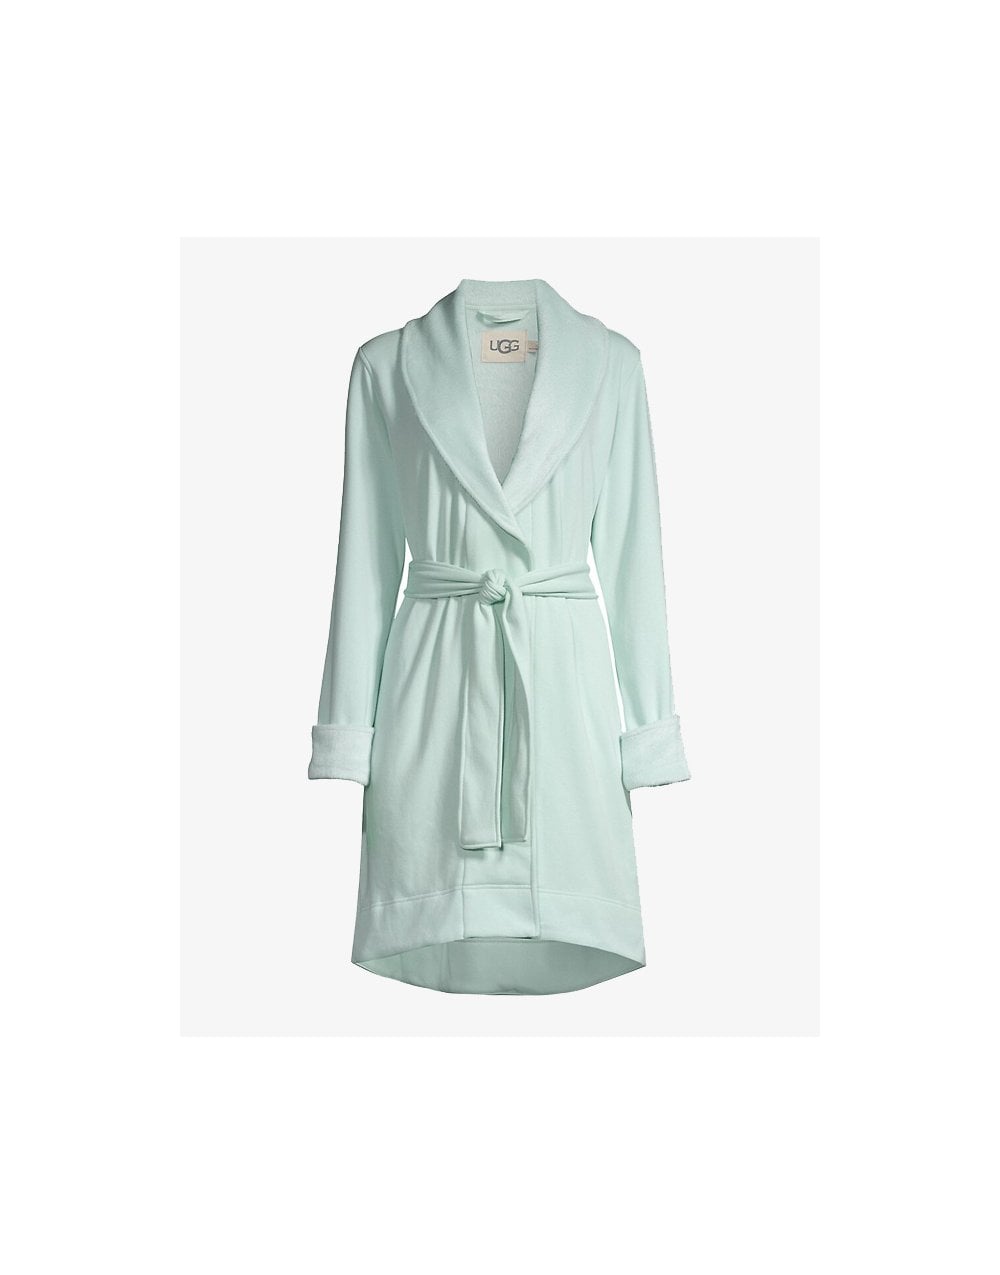 UGG Fountain Blanche II Dressing Gown